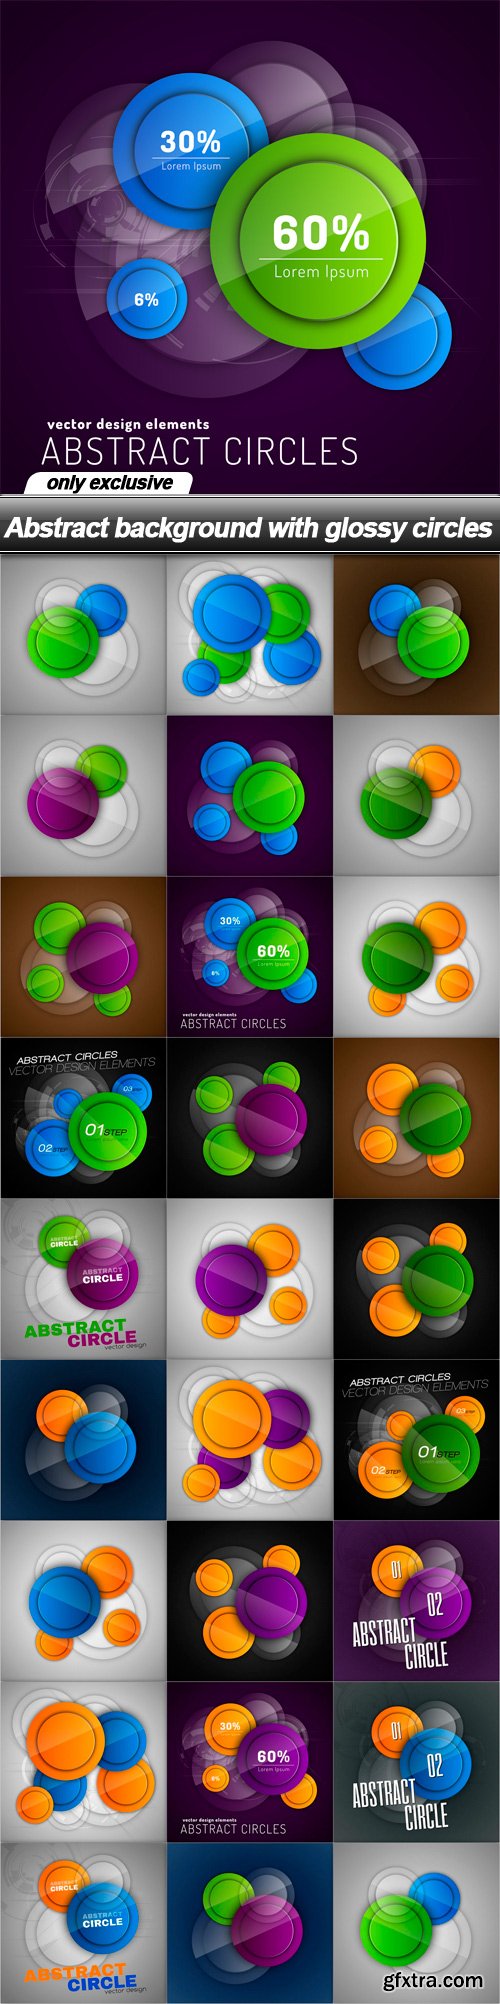 Abstract background with glossy circles - 26 EPS